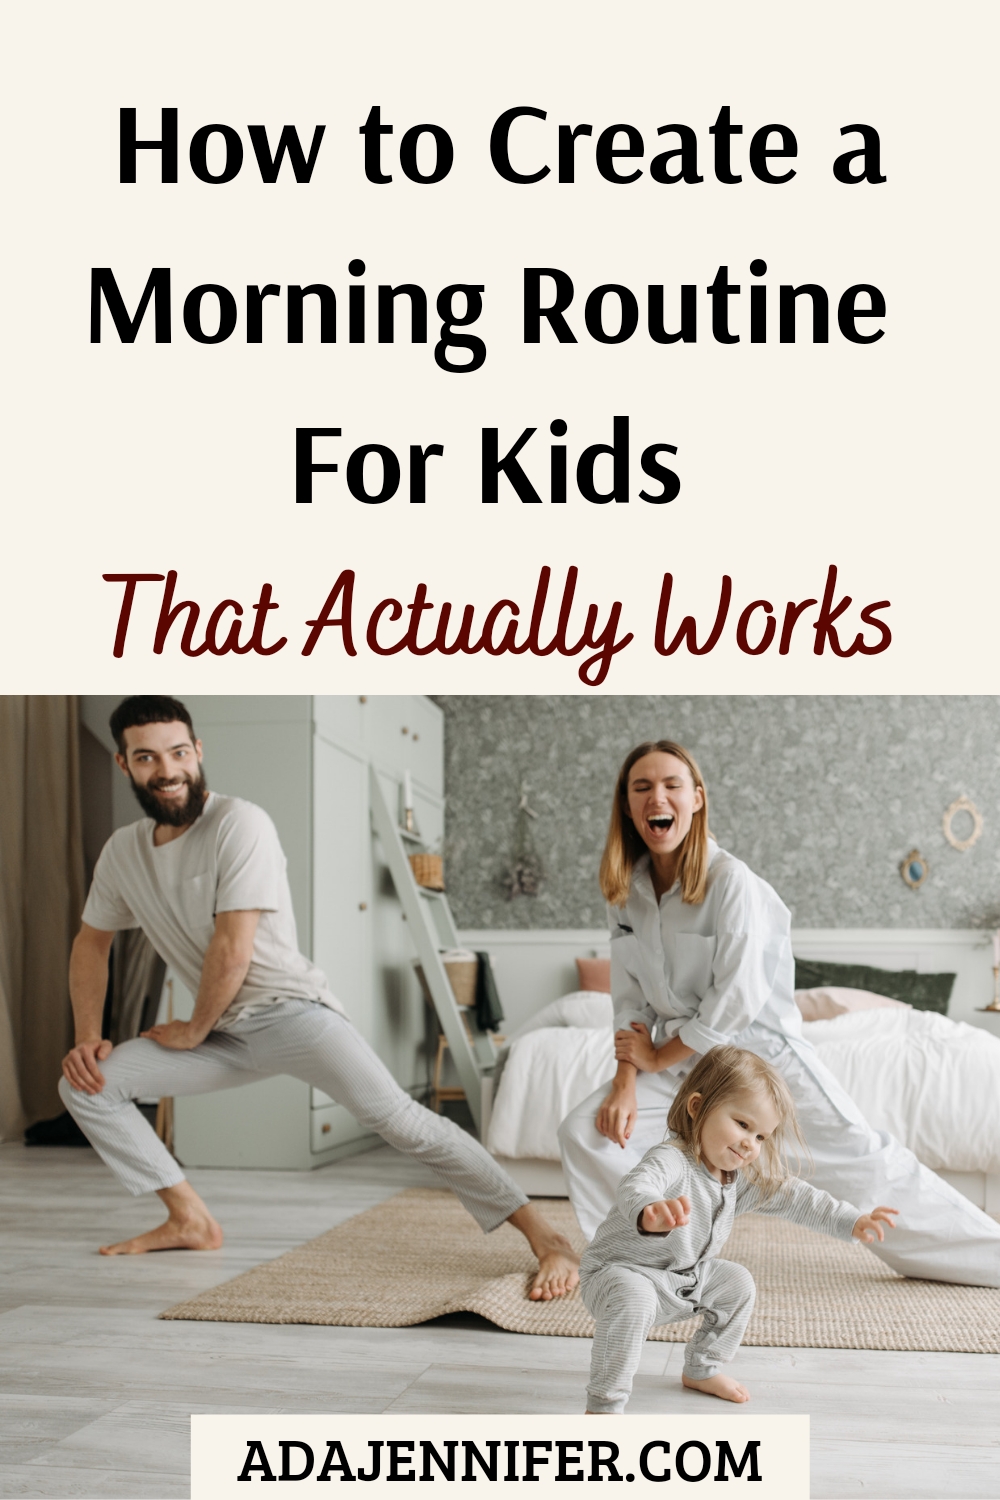 How to create a morning routine for kids